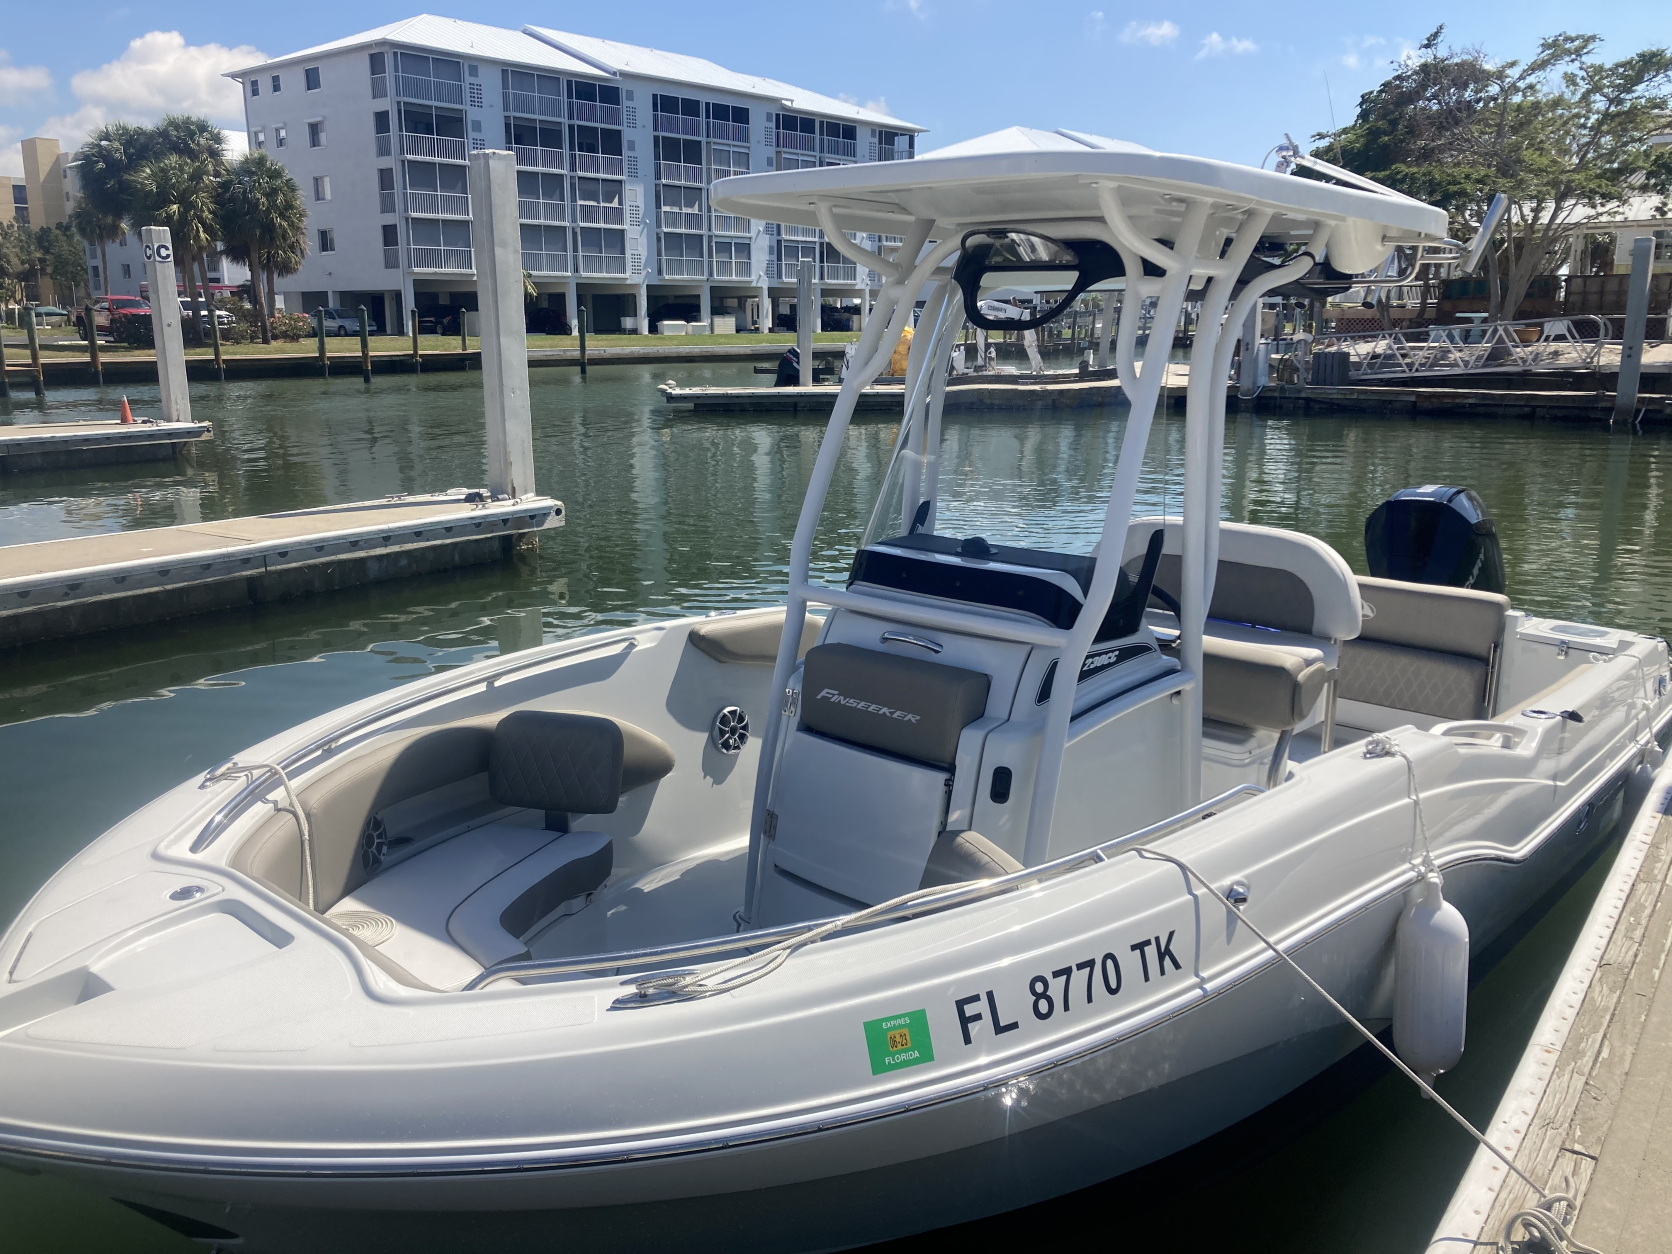 REELAXATION (CROWNLINE 23' Offshore Center Console 250 HP - Fishing)